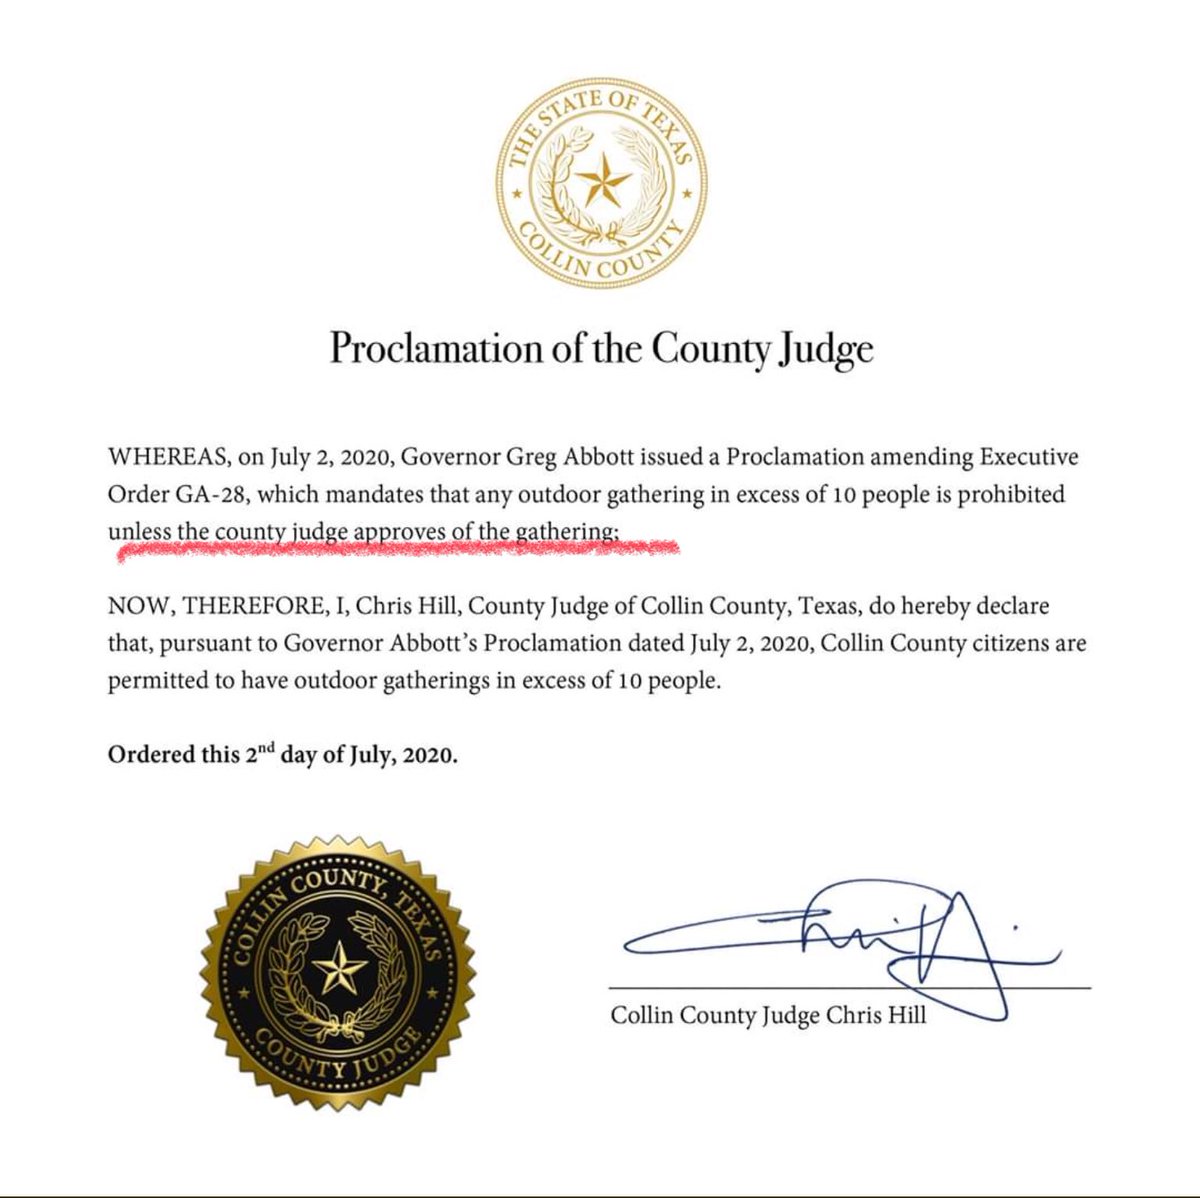 It looks like #TXGov Abbott isn’t such a hero tryna protect the health of Texans, after all. Cynical me says he included the line about the county judge knowing full well the fekker would ‘approve of the gathering.’ Transparent AF! Amirite? #wtpTX #wtp2020 @wtp__2020